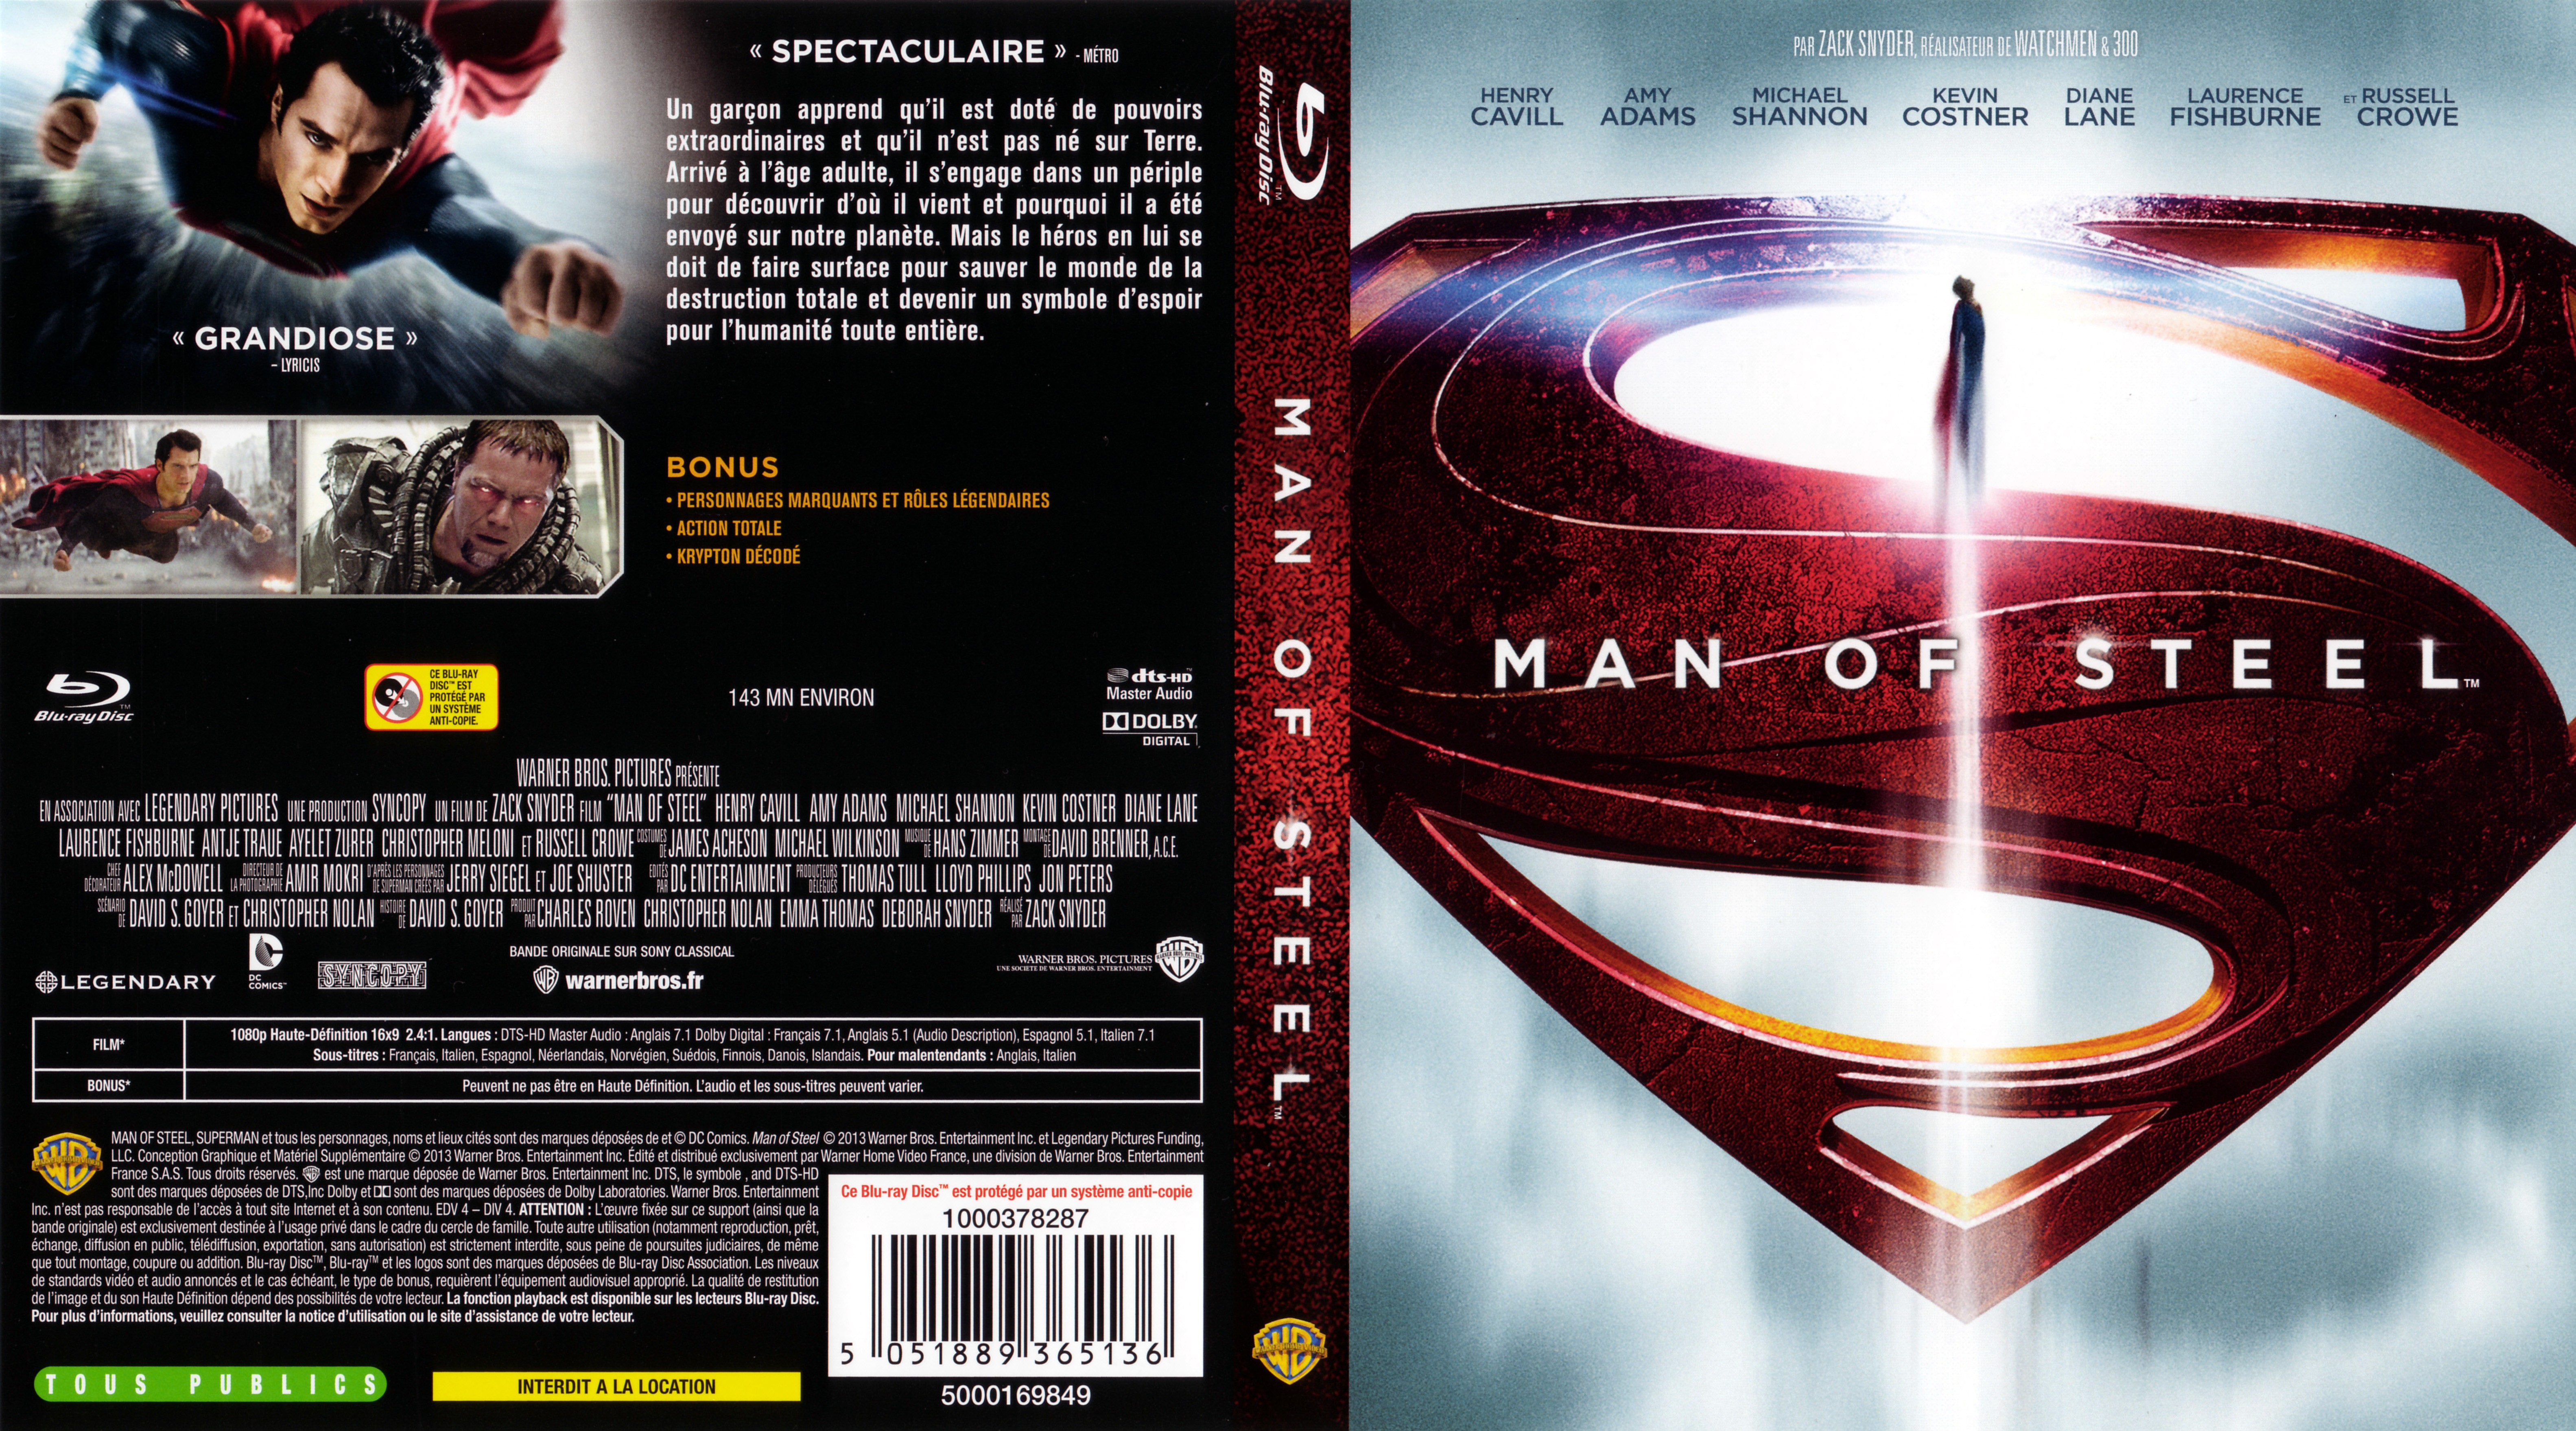 Jaquette DVD Man of Steel (BLU-RAY) v4